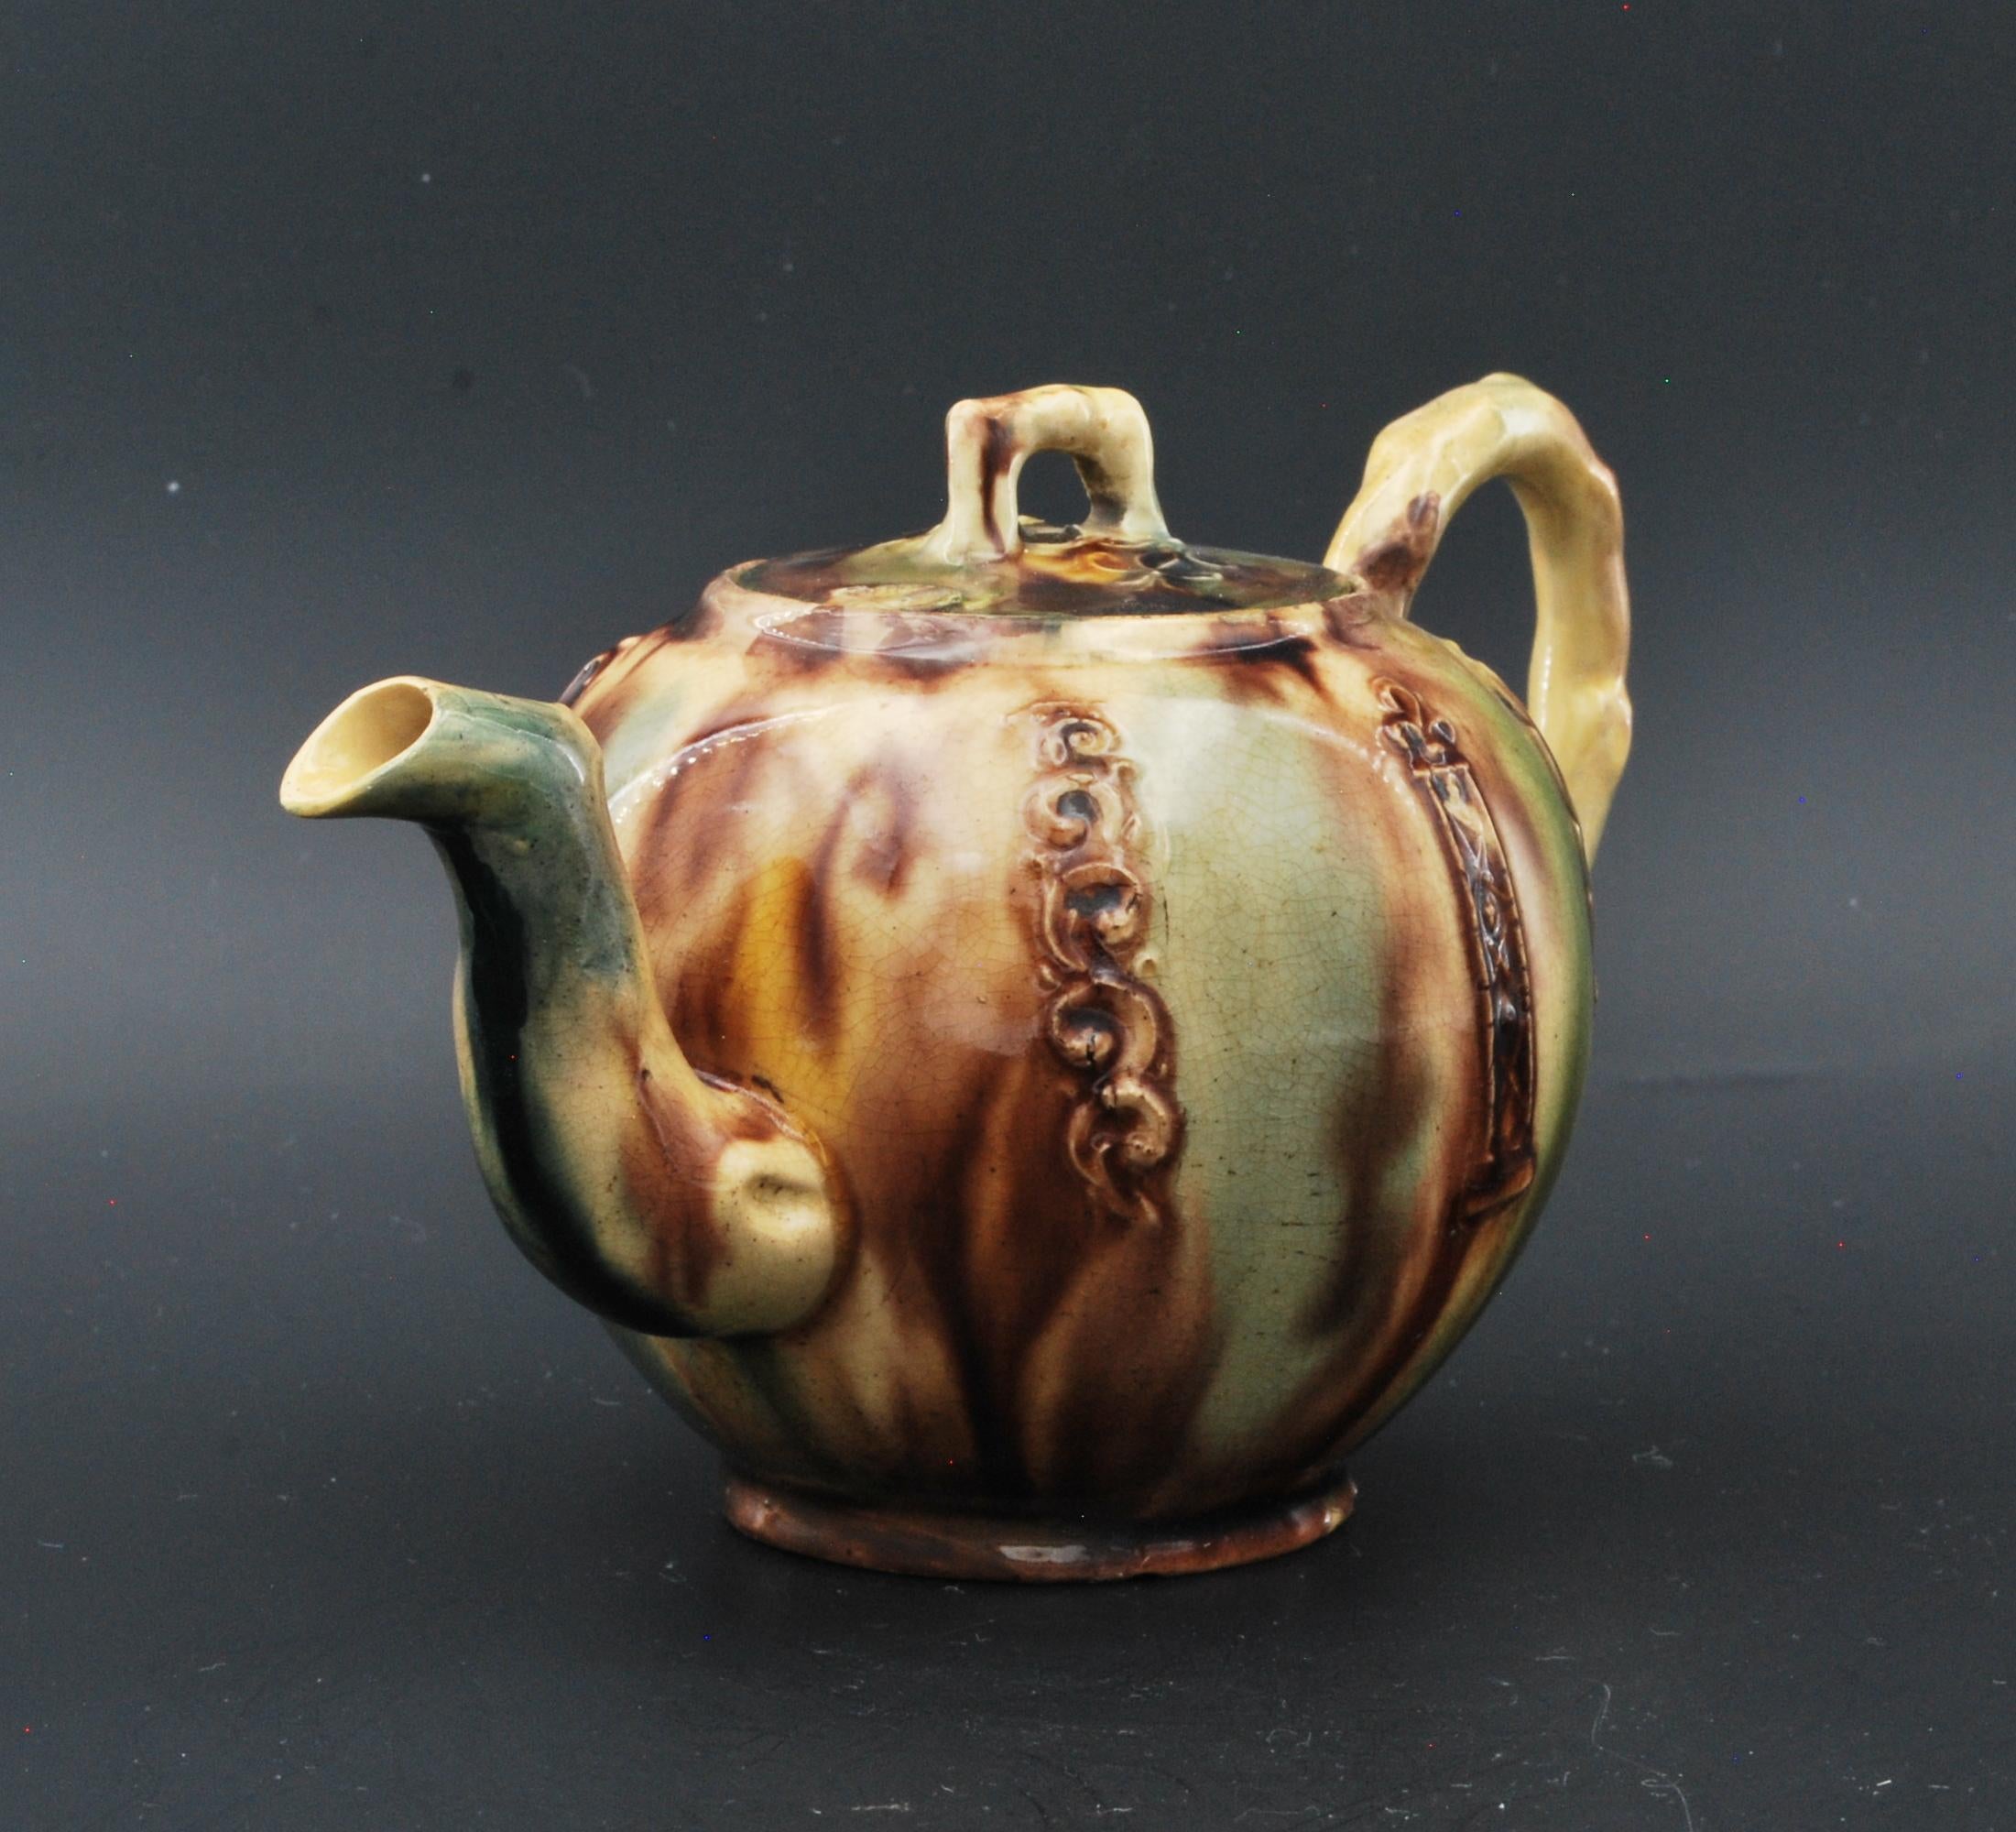 old teapots for sale